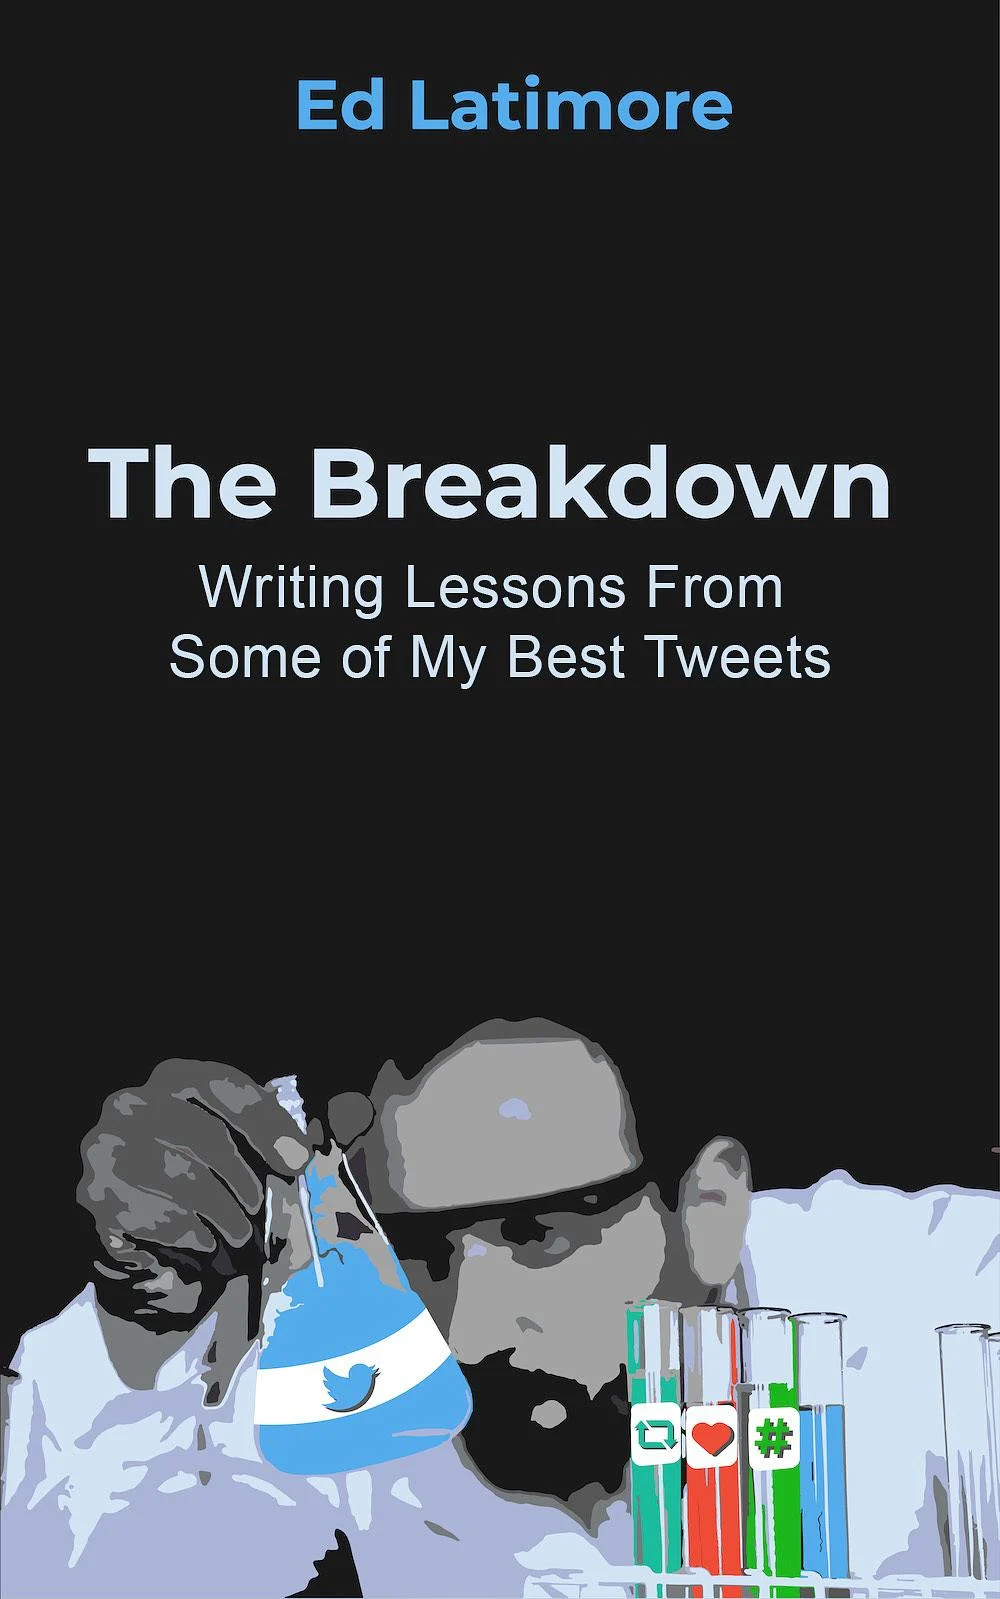 The Breakdown— Writing Lessons From My Best Tweets